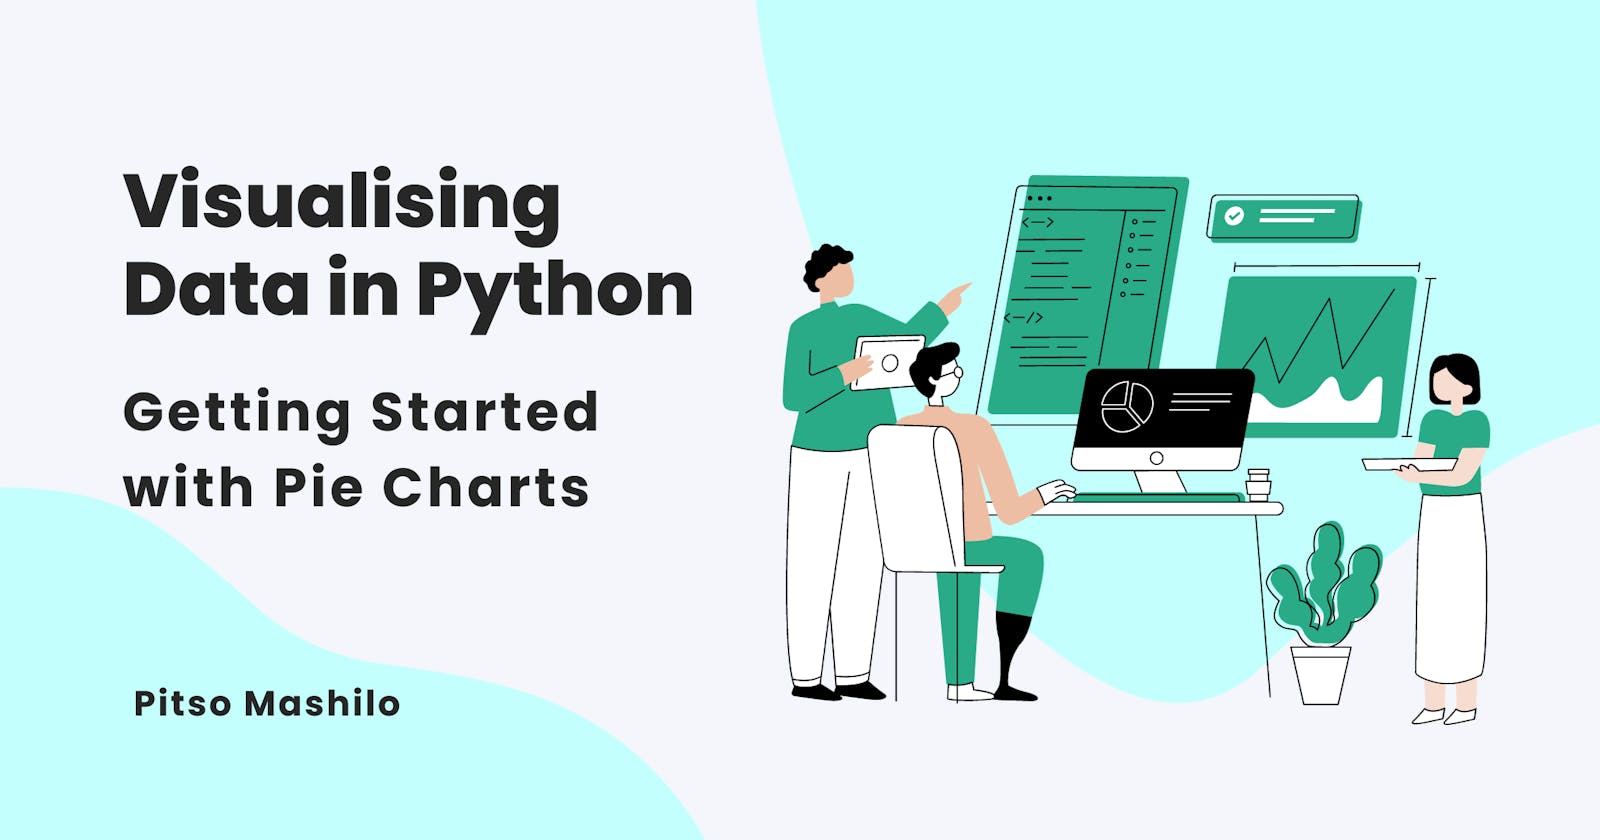 Getting Started with Pie Charts